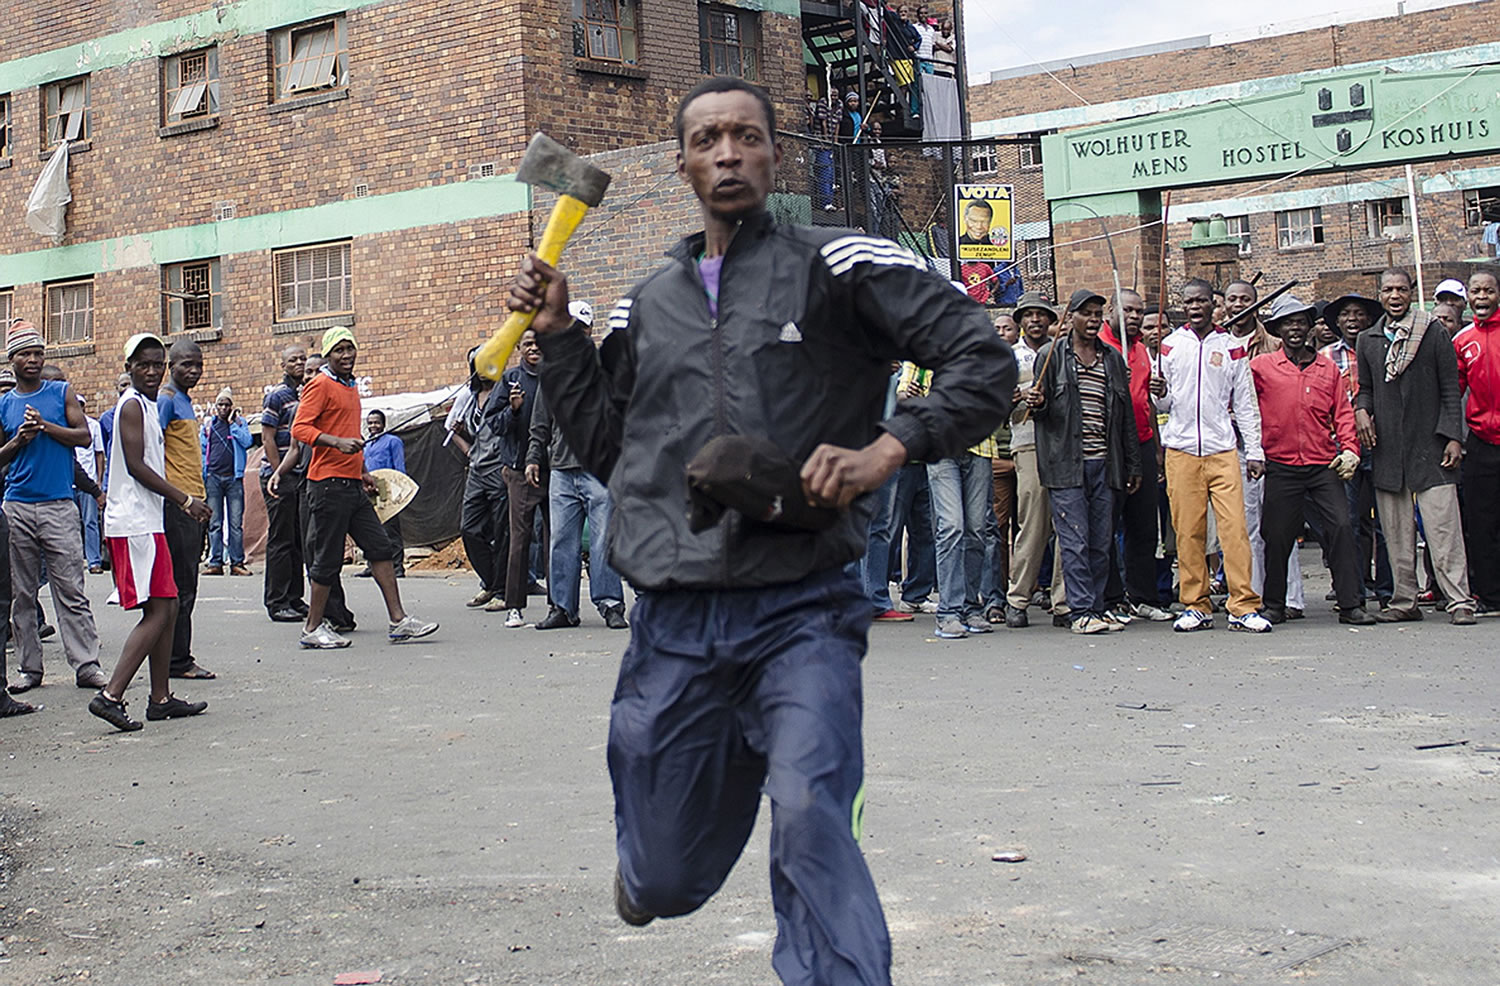 A man armed with an ax threatens members of the press Friday in Johannesburg after overnight attacks between locals and immigrants in Johannesburg. Several shops and cars were torched overnight in continued anti-immigrant attacks by locals.